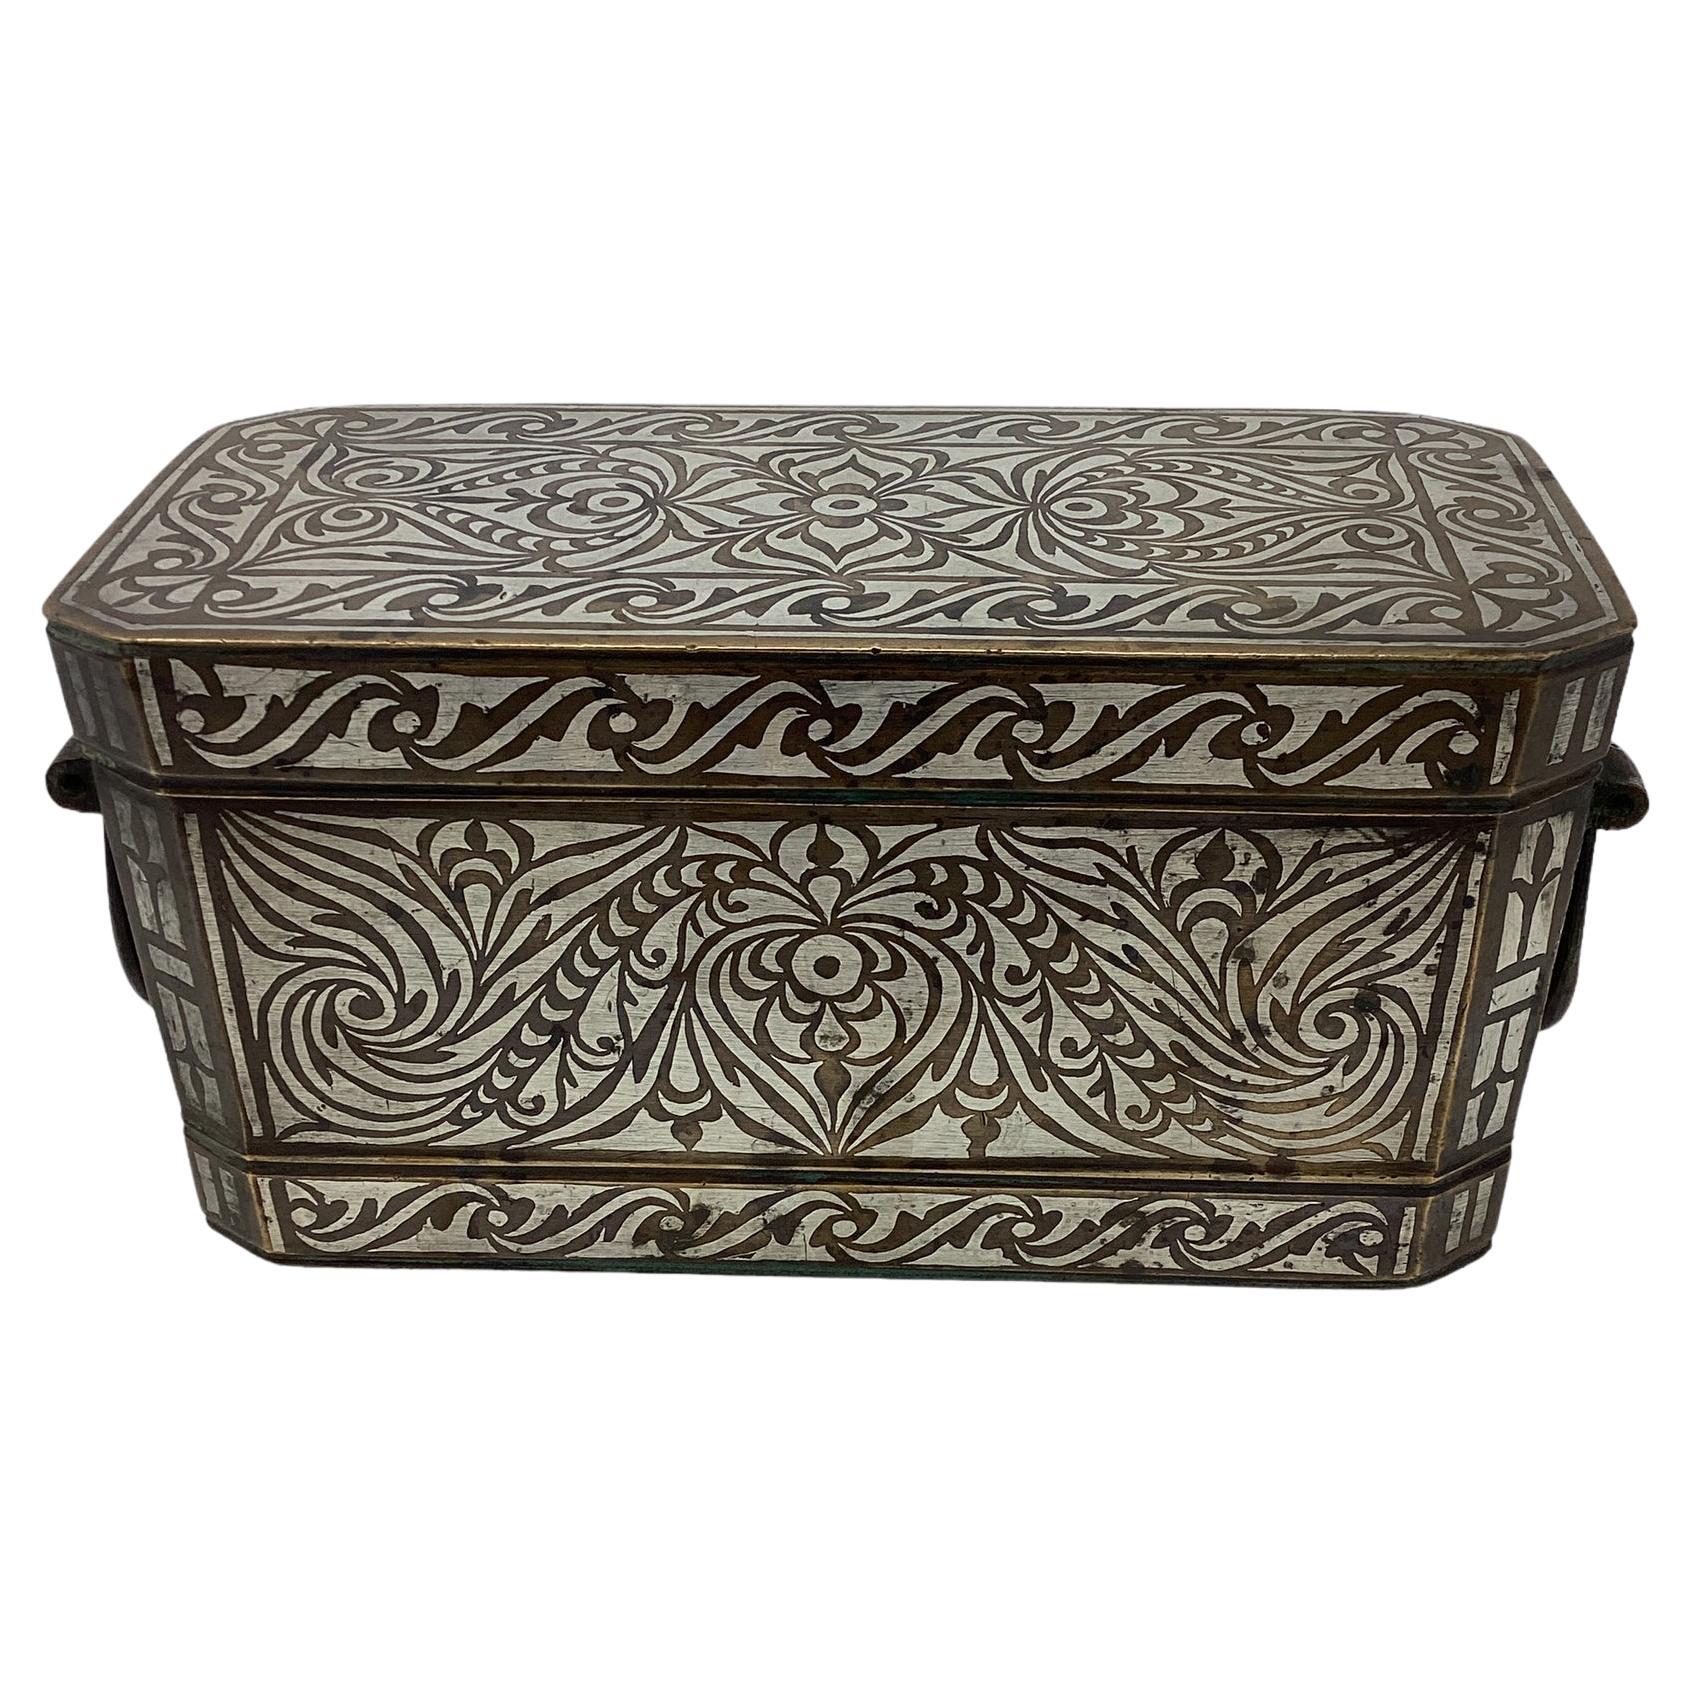  Antique Bronze and Silver Inlaid Betel Nut Box